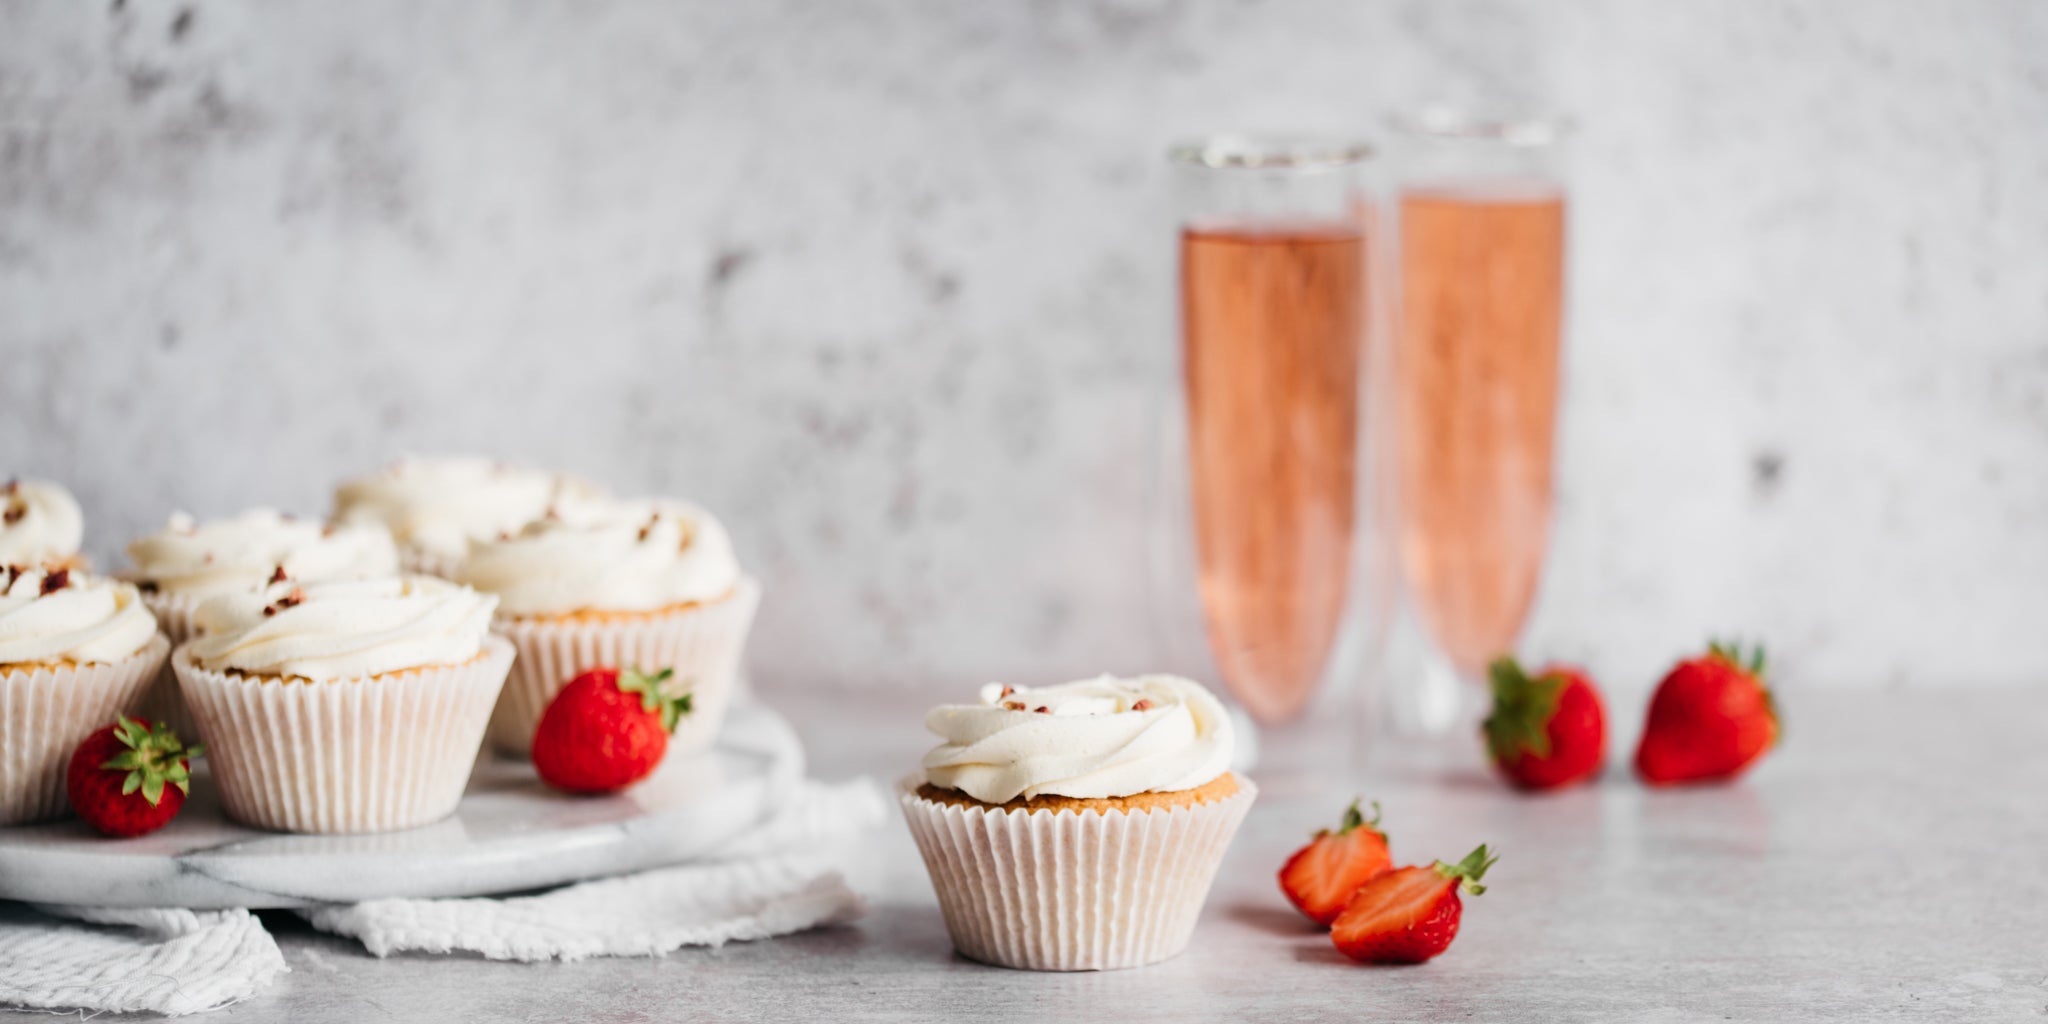 6 cupcakes on a white plate with strawberries. Two glasses of prosecco in the background. One cupcake in the forefront with strawberries around it